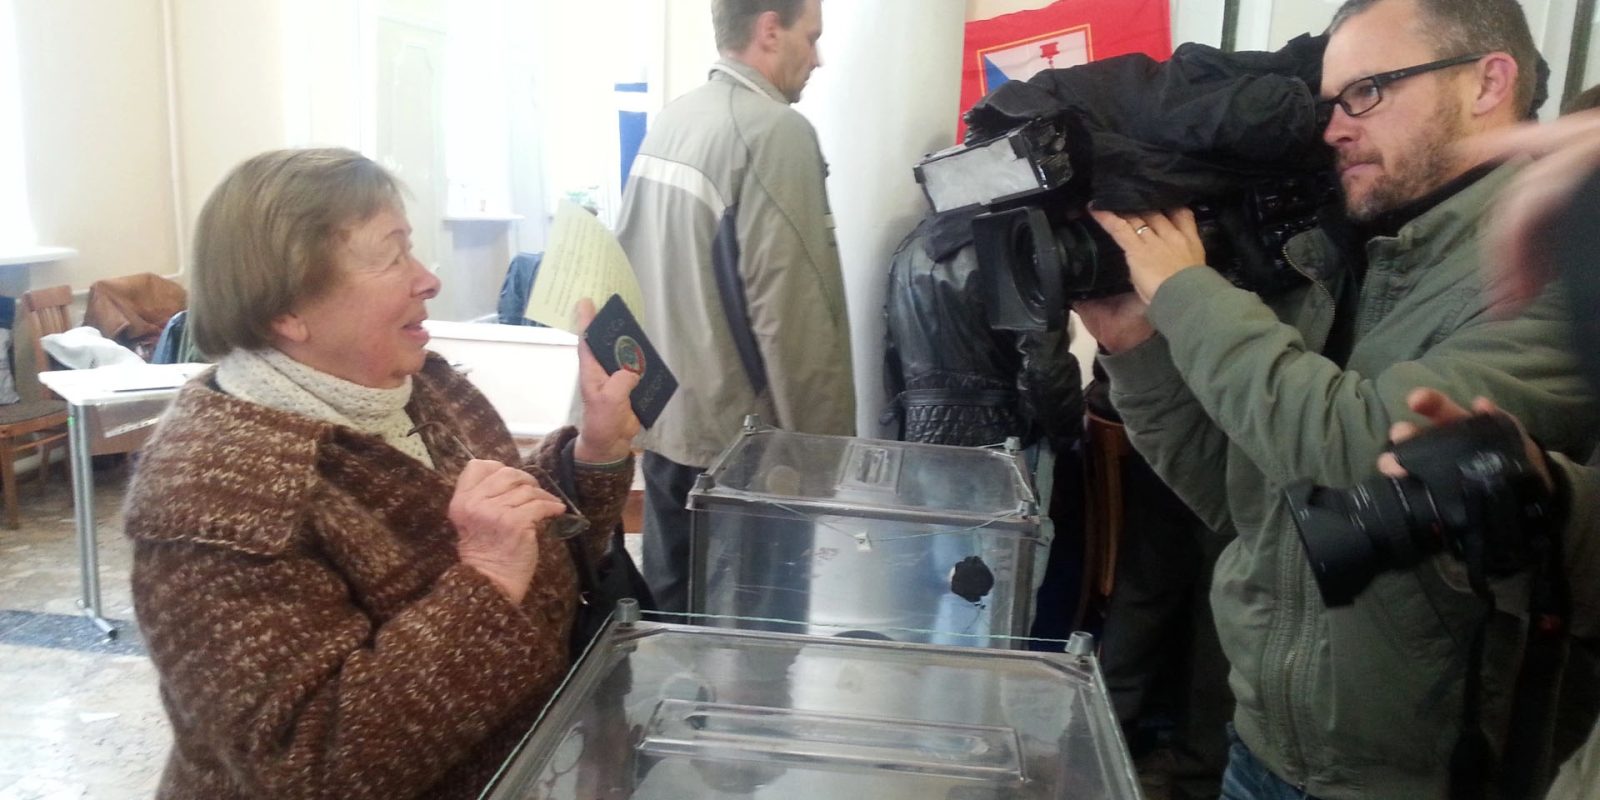 Sham referendums in Ukraine | Woman showing her passport to place ballot in transparent box